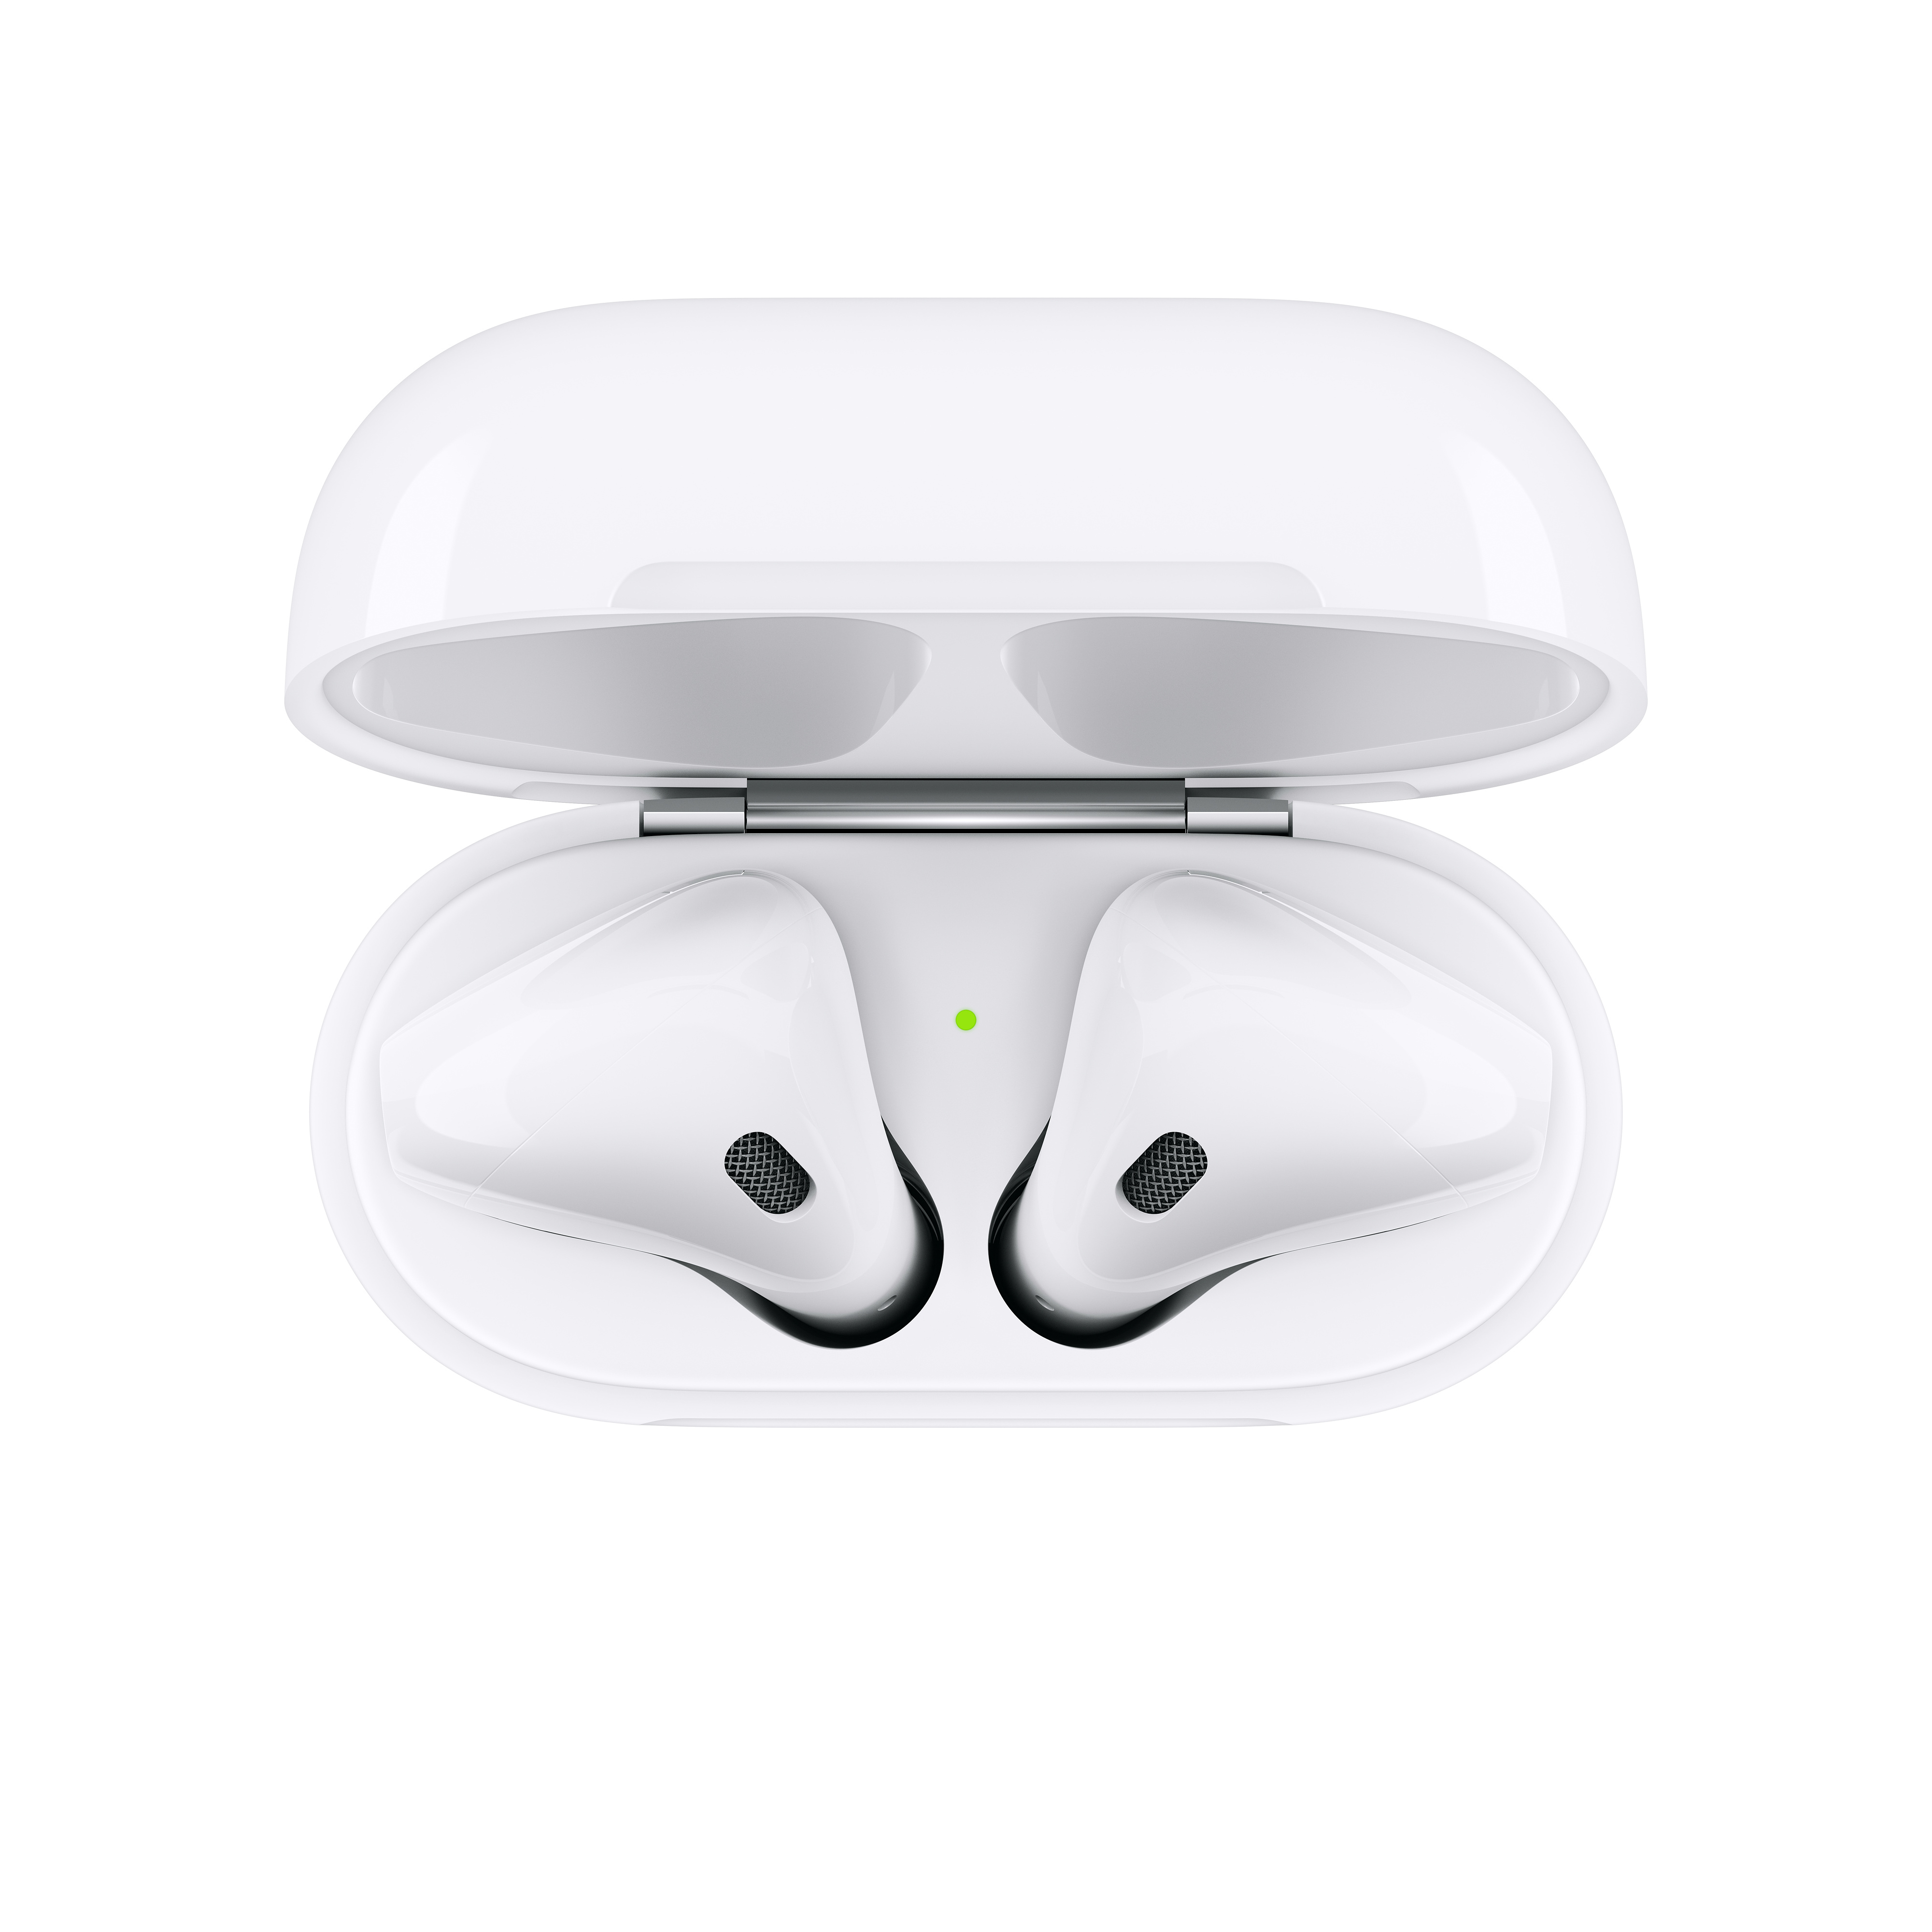 Apple airpods with charging case